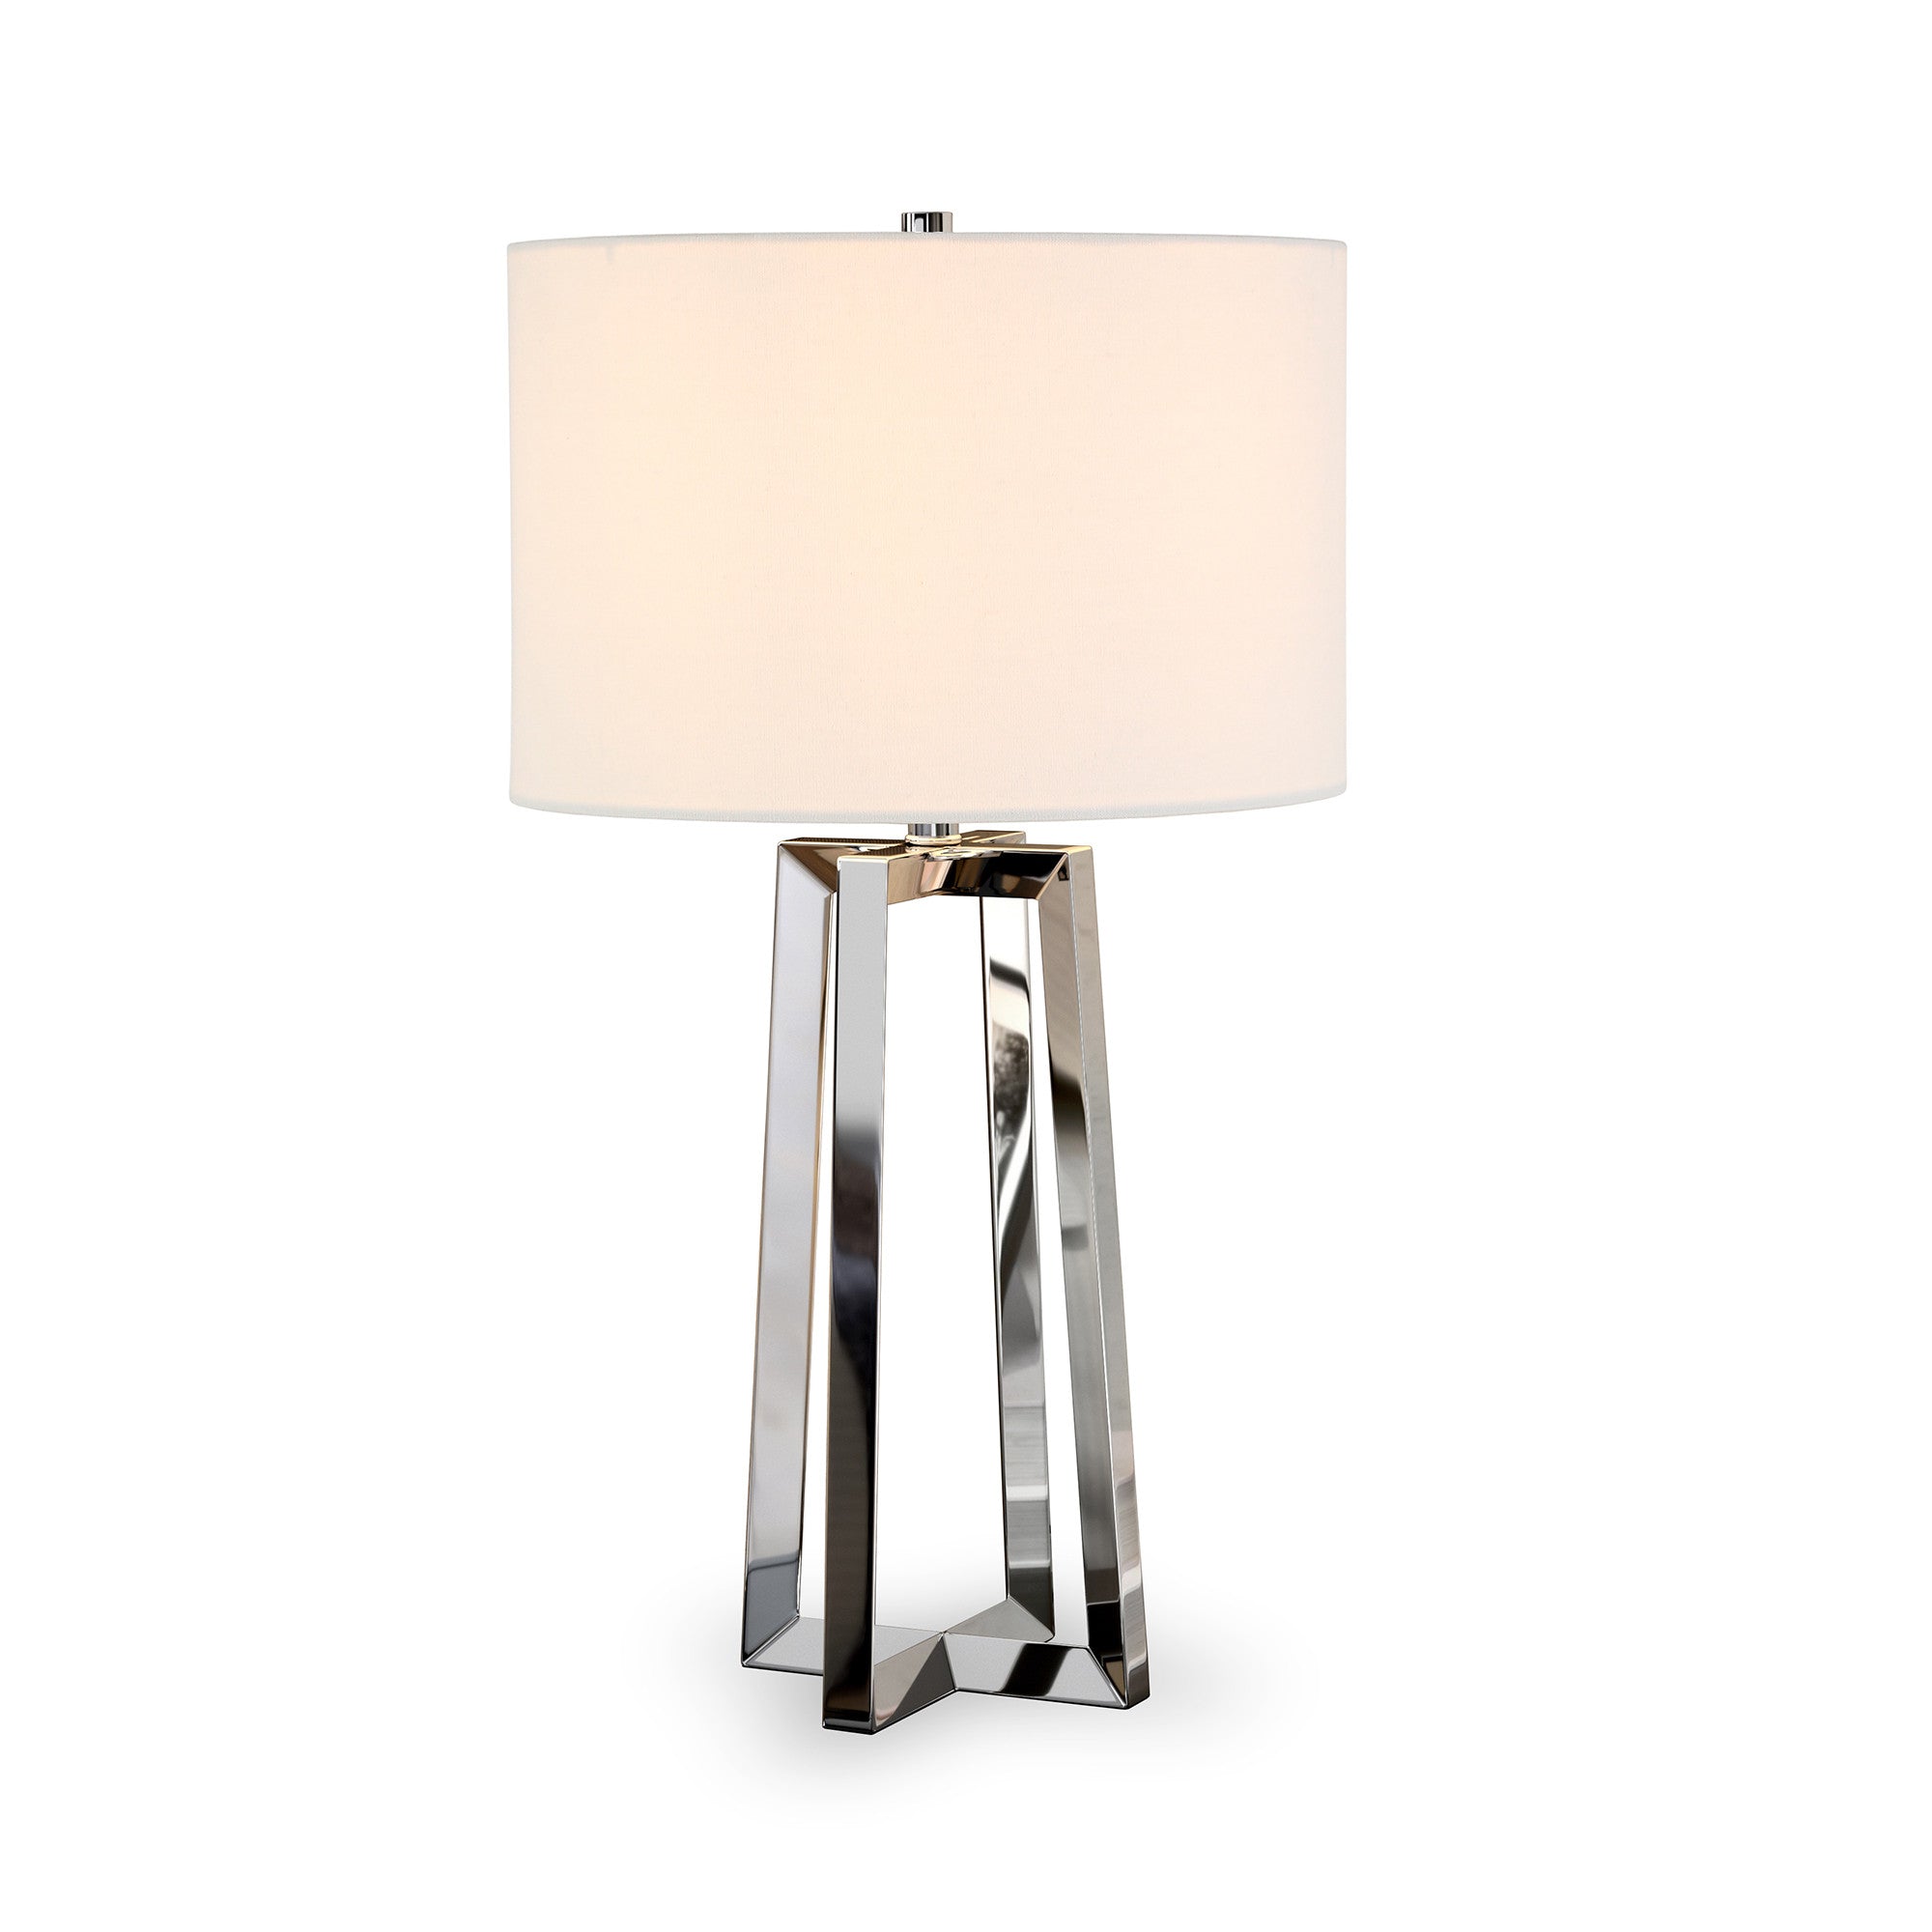 24" Nickel Metal Table Lamp With White Drum Shade